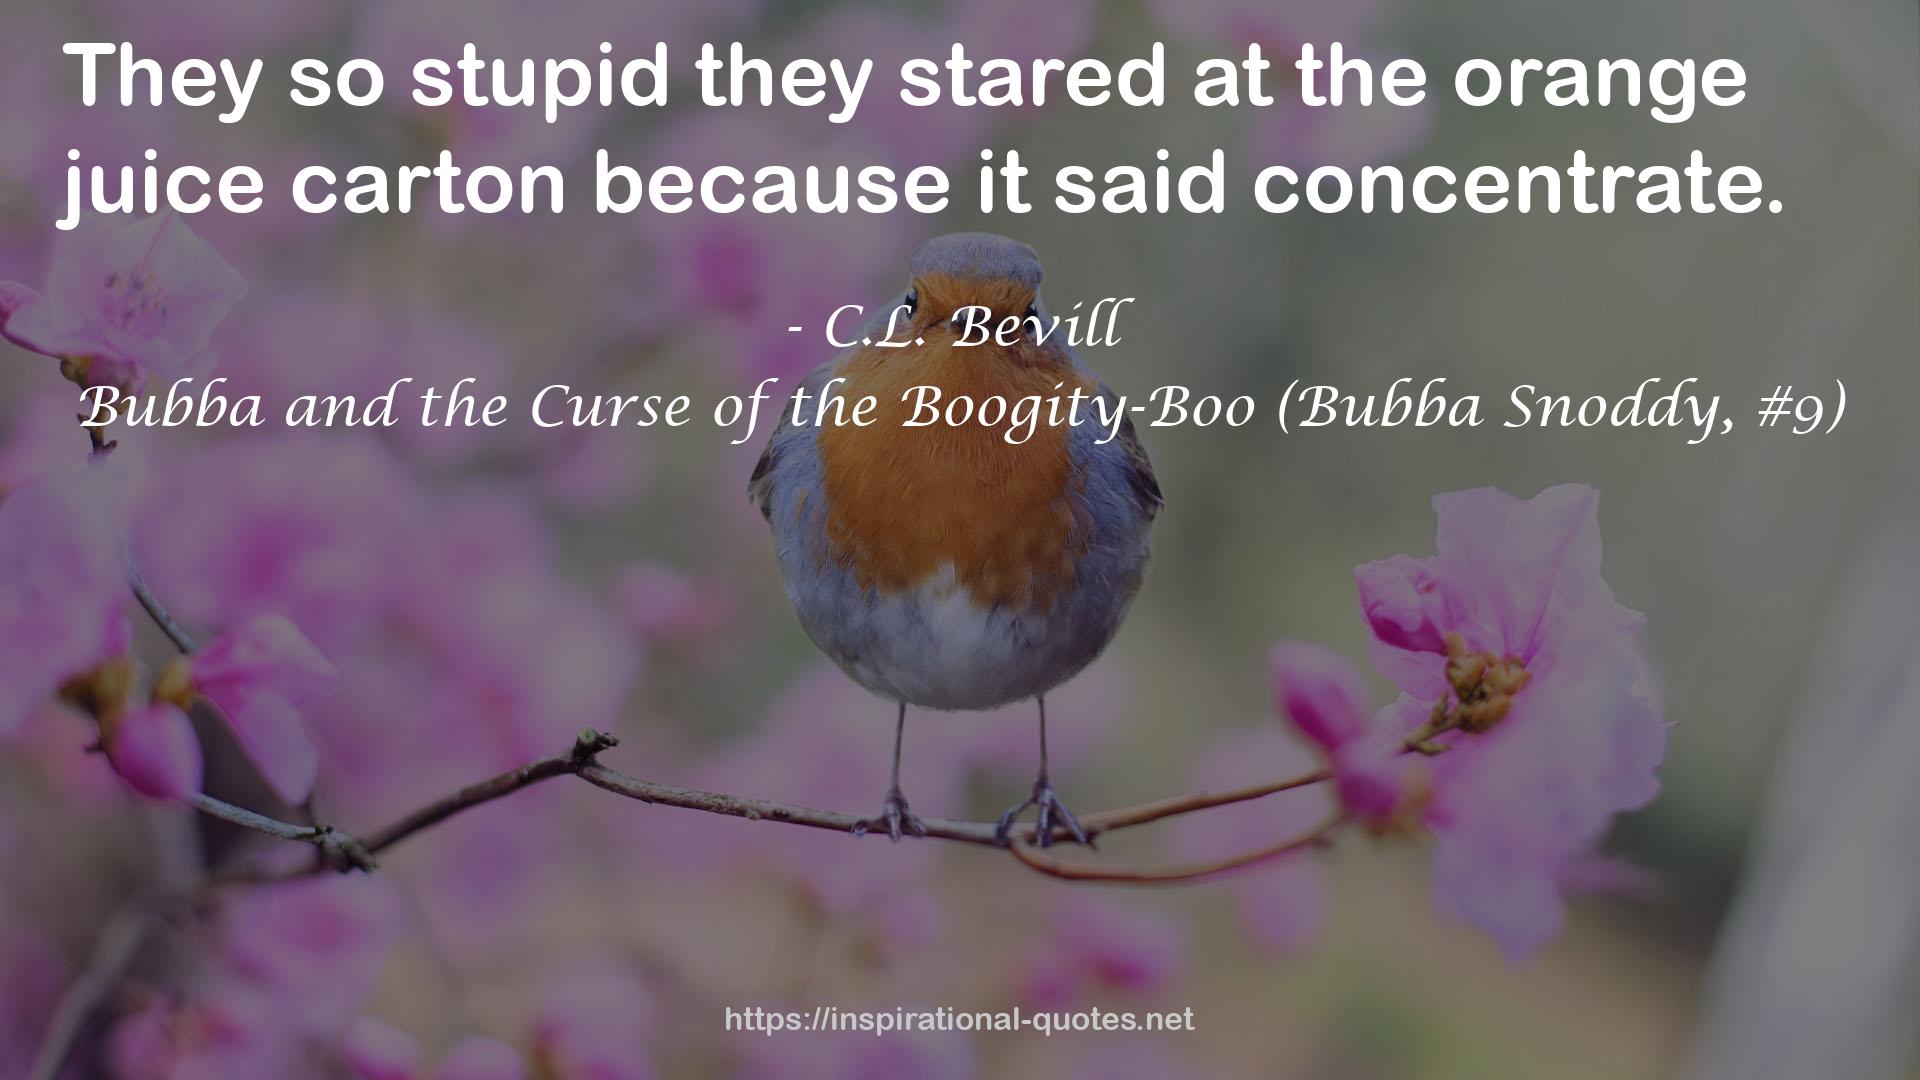 Bubba and the Curse of the Boogity-Boo (Bubba Snoddy, #9) QUOTES